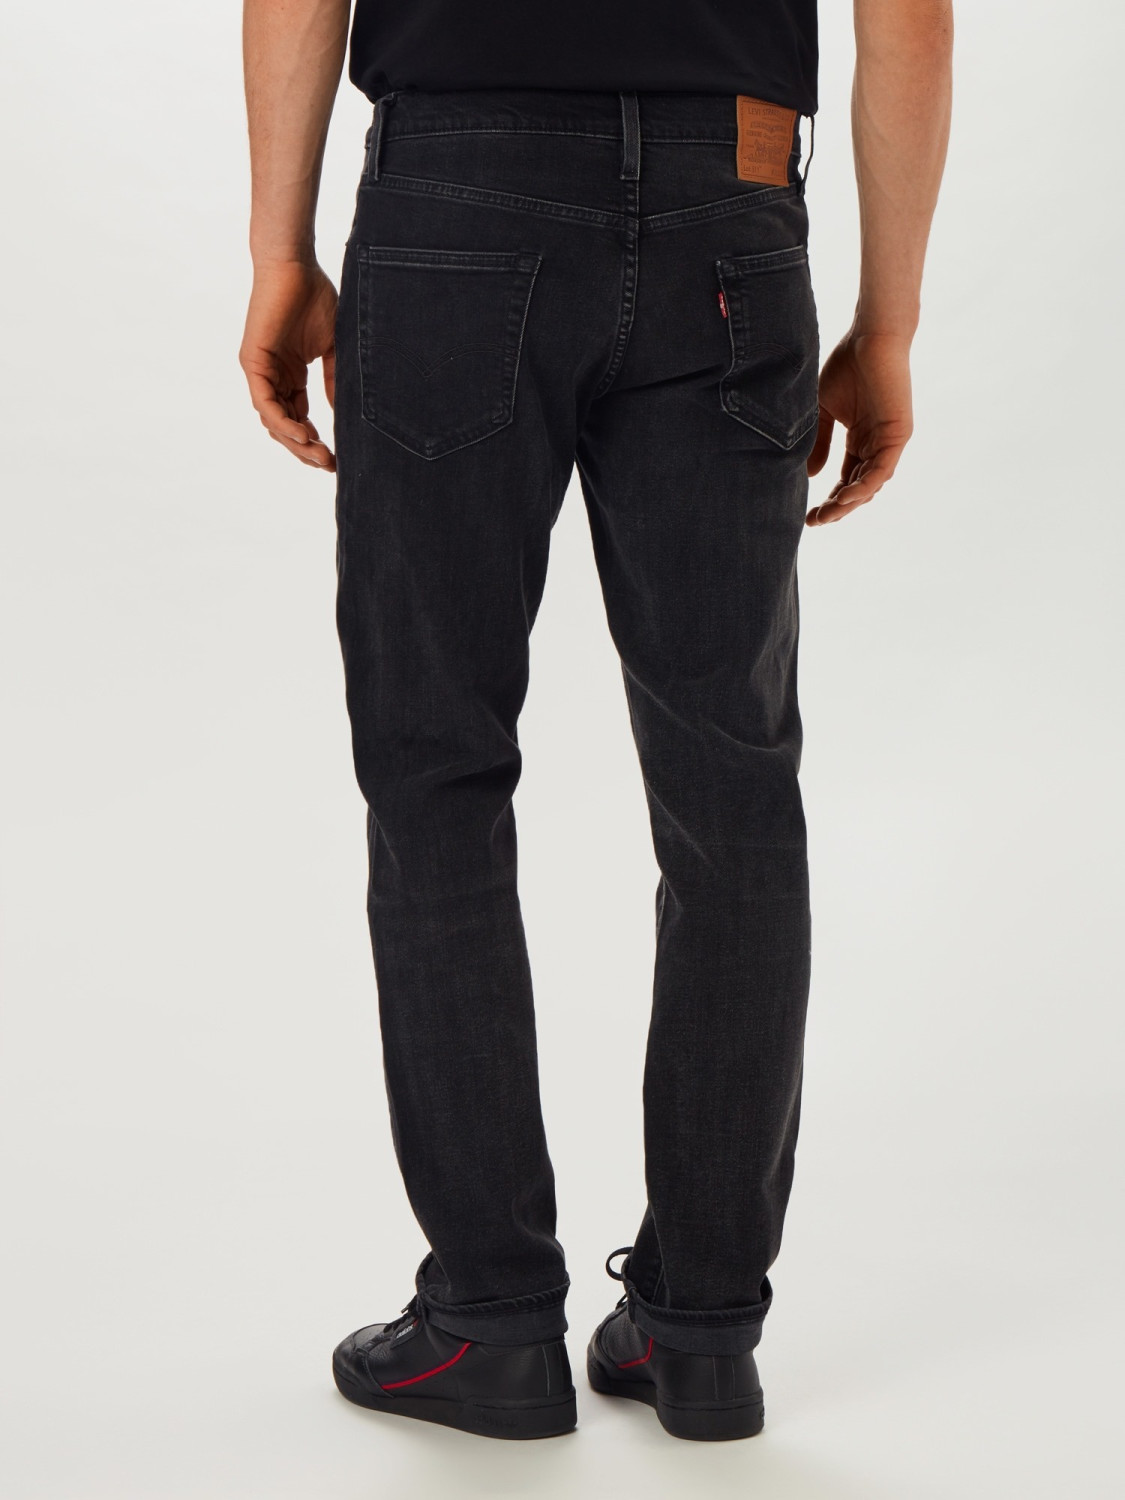 Buy Levi's 511 Slim Fit Men caboose black from £33.85 (Today) – Best ...